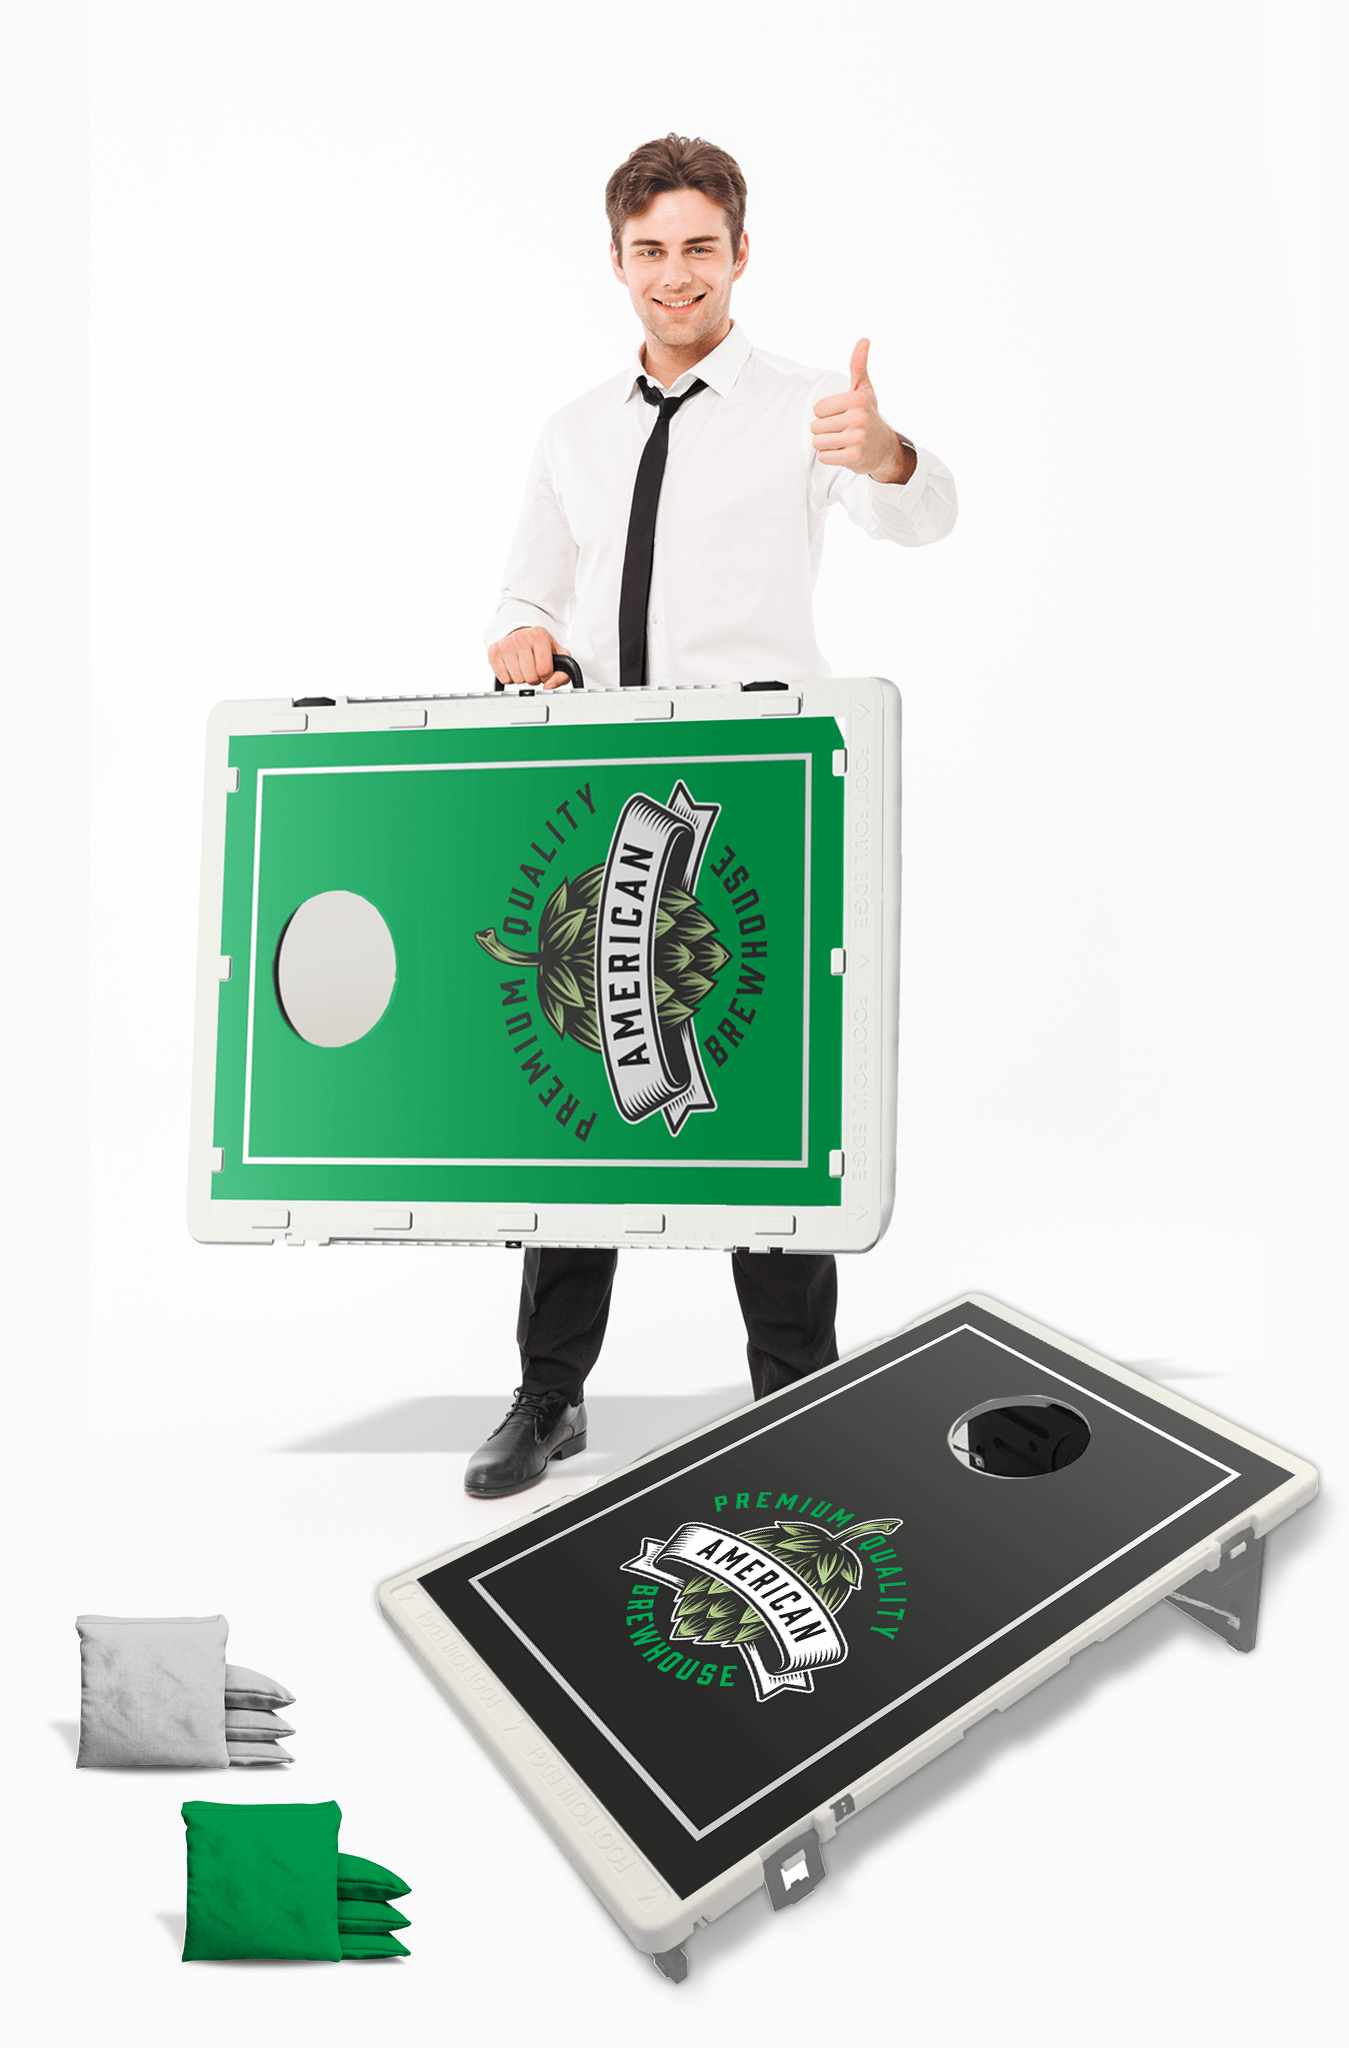 OFFICIAL SIZE 8 FOOT FOLDING BEER PONG TABLE + FREE BEER PONG KIT + TOOL